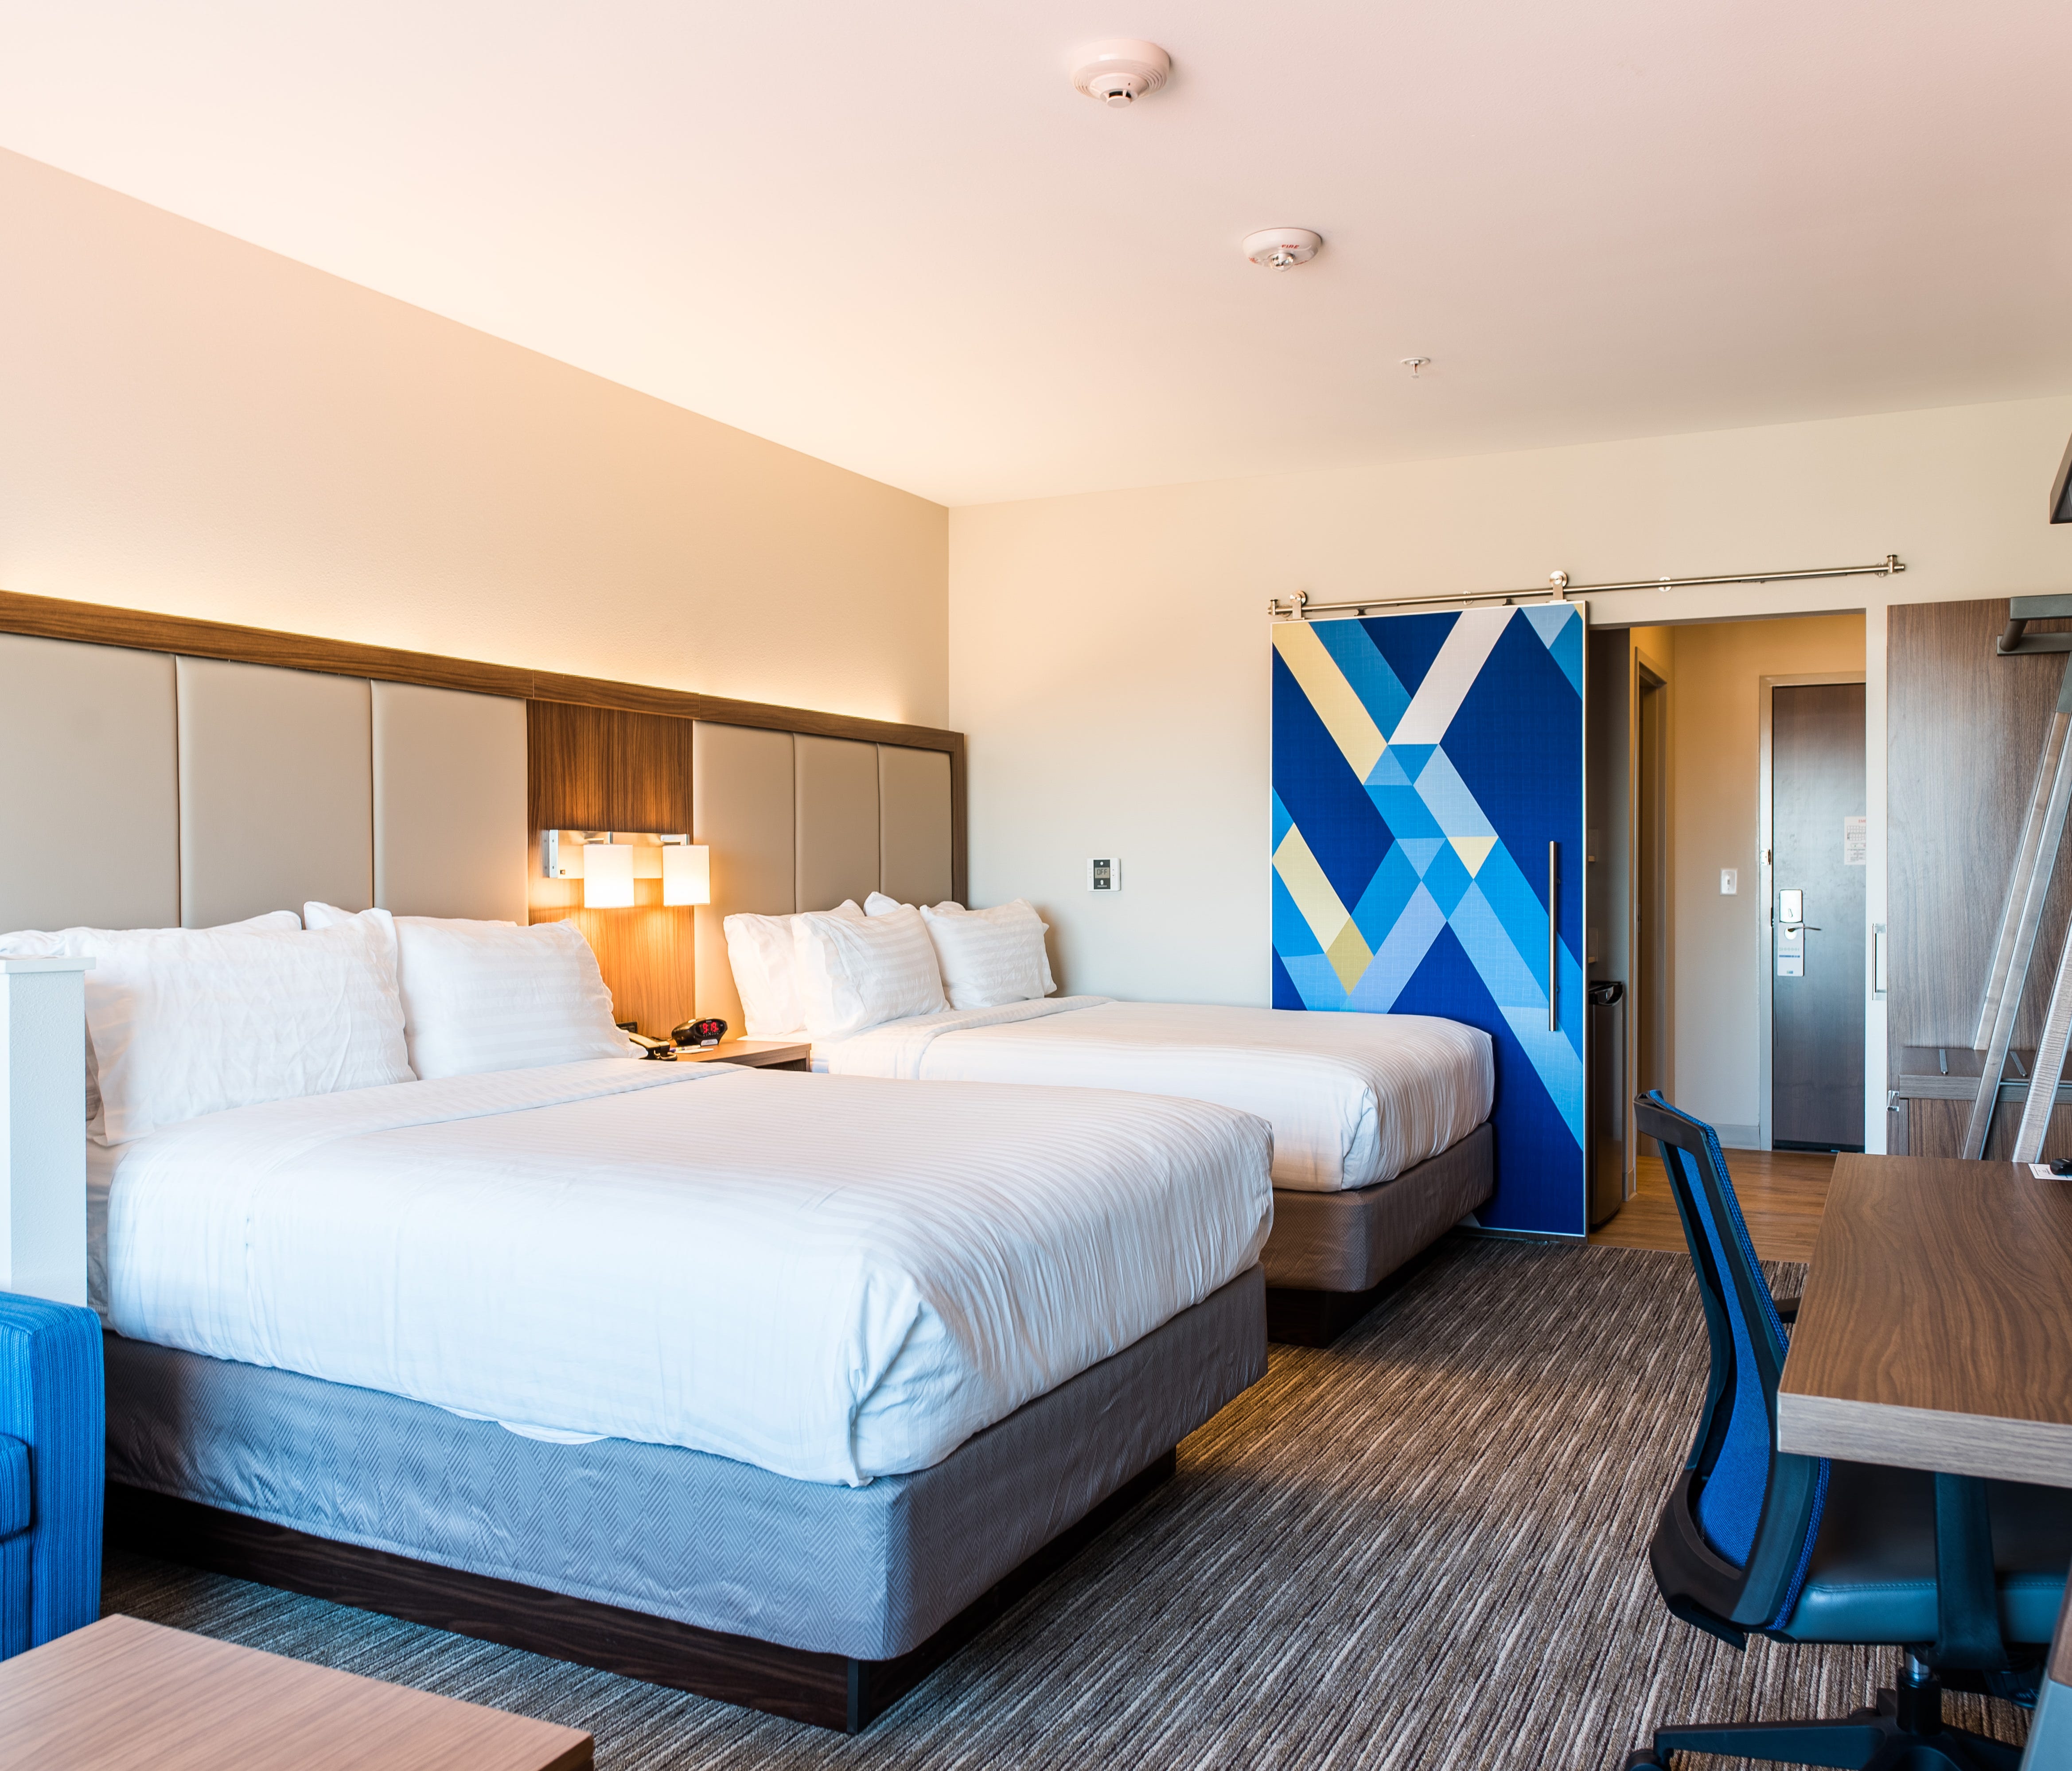 Rooms in select Holiday Inn Express hotels have sliding doors to separate the sleeping area from the entry and bathroom in order to promote sleep.